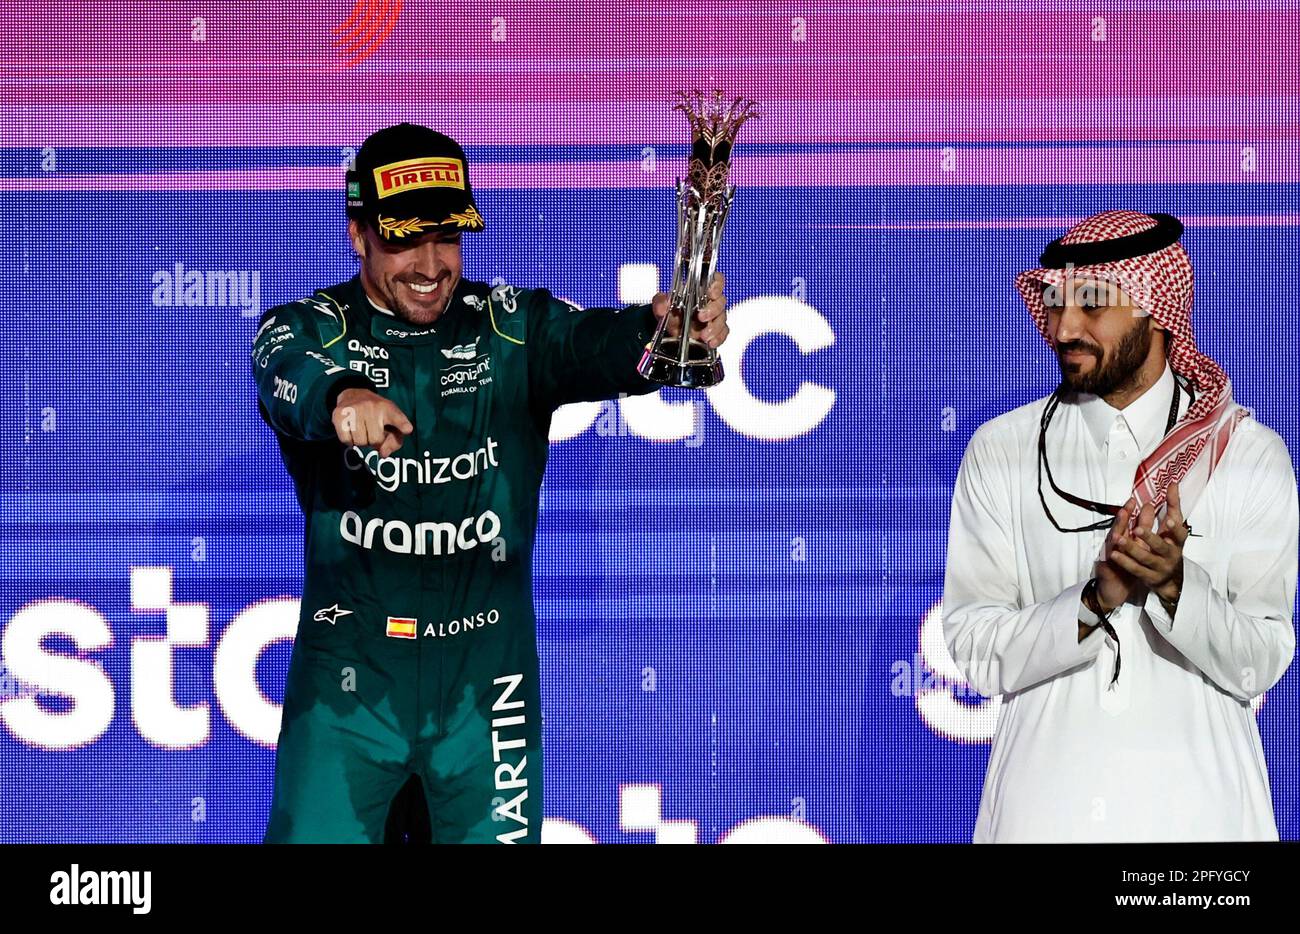 Formula One F1 - Saudi Arabian Grand Prix - Jeddah Corniche Circuit, Jeddah, Saudi Arabia - March 19, 2023 Aston Martin's Fernando Alonso celebrates with a trophy on the podium after finishing third place in the Saudi Arabian Grand Prix before he was handed a 10 second time penalty that drops him to fourth place in the final results REUTERS/Hamad I Mohammed Stock Photo